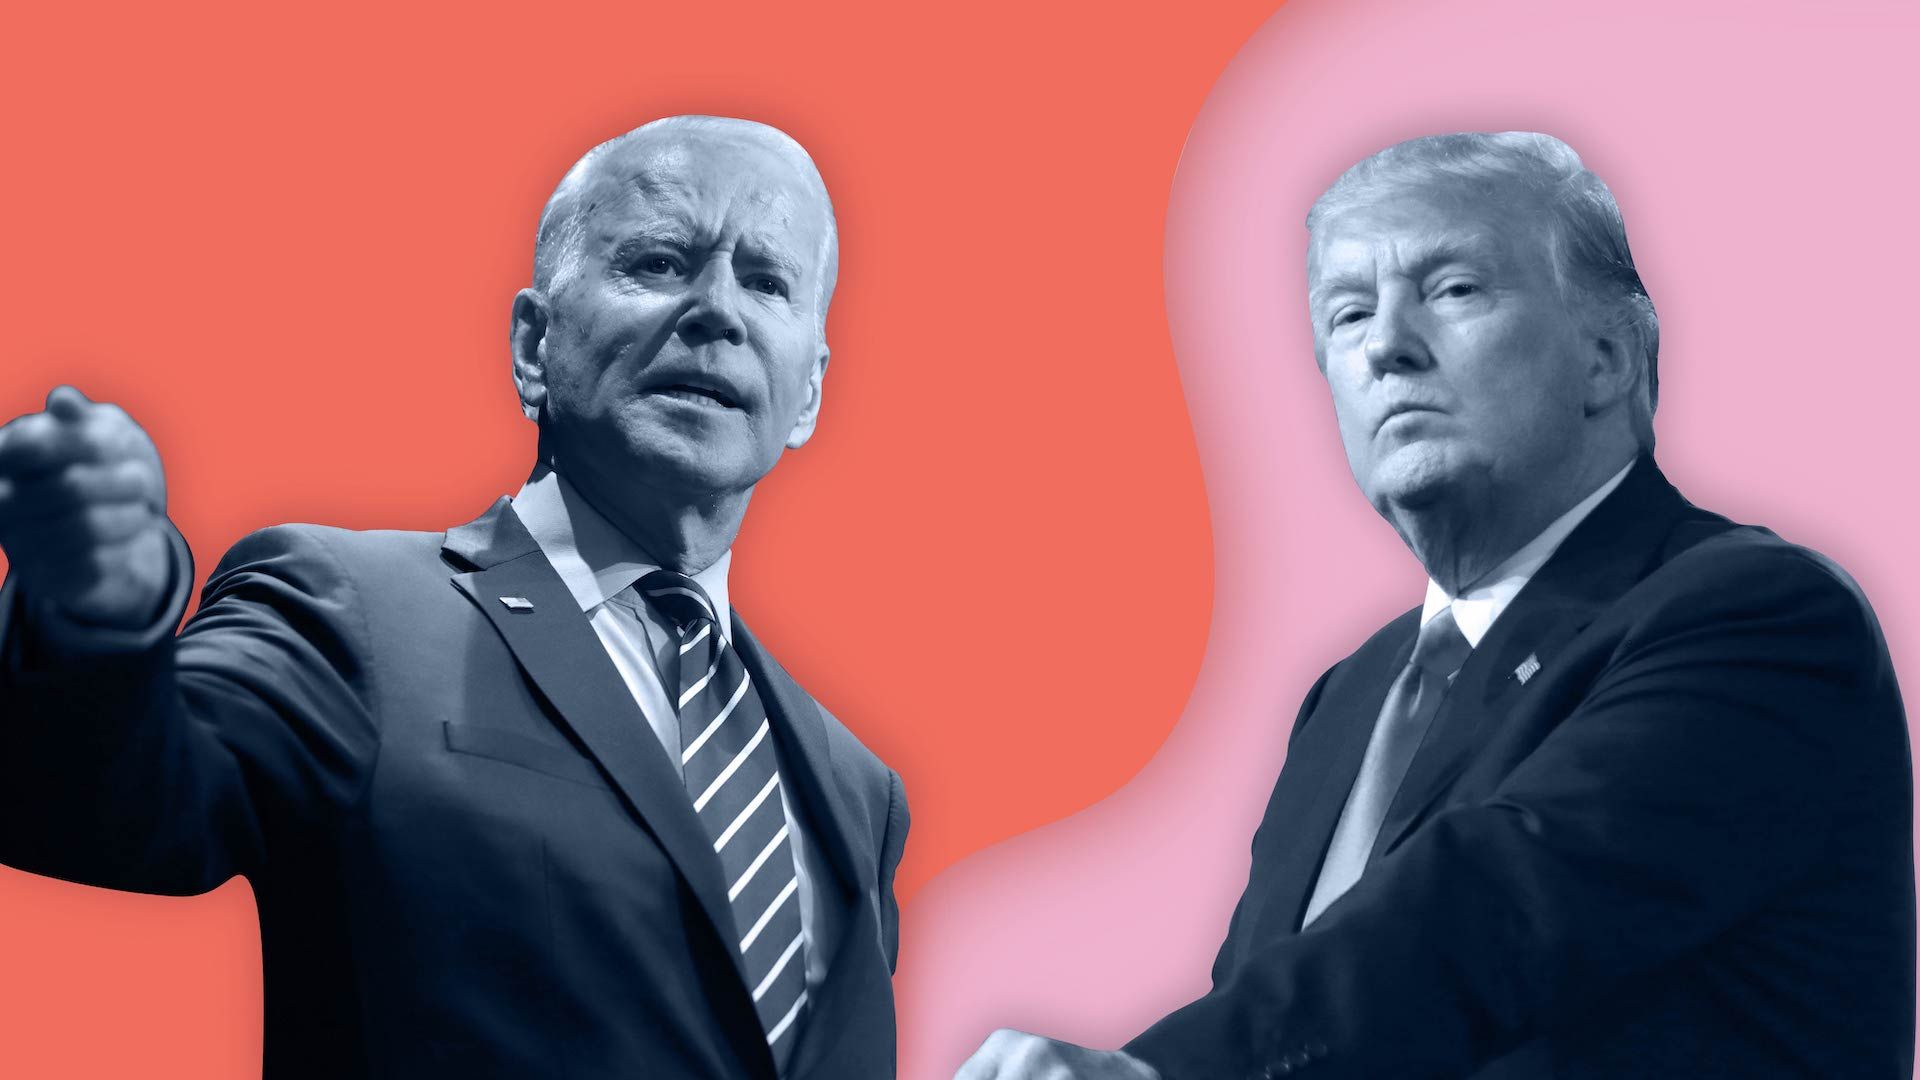 Biden vs. Trump: Where the 2020 Candidates Stand on Climate Issues